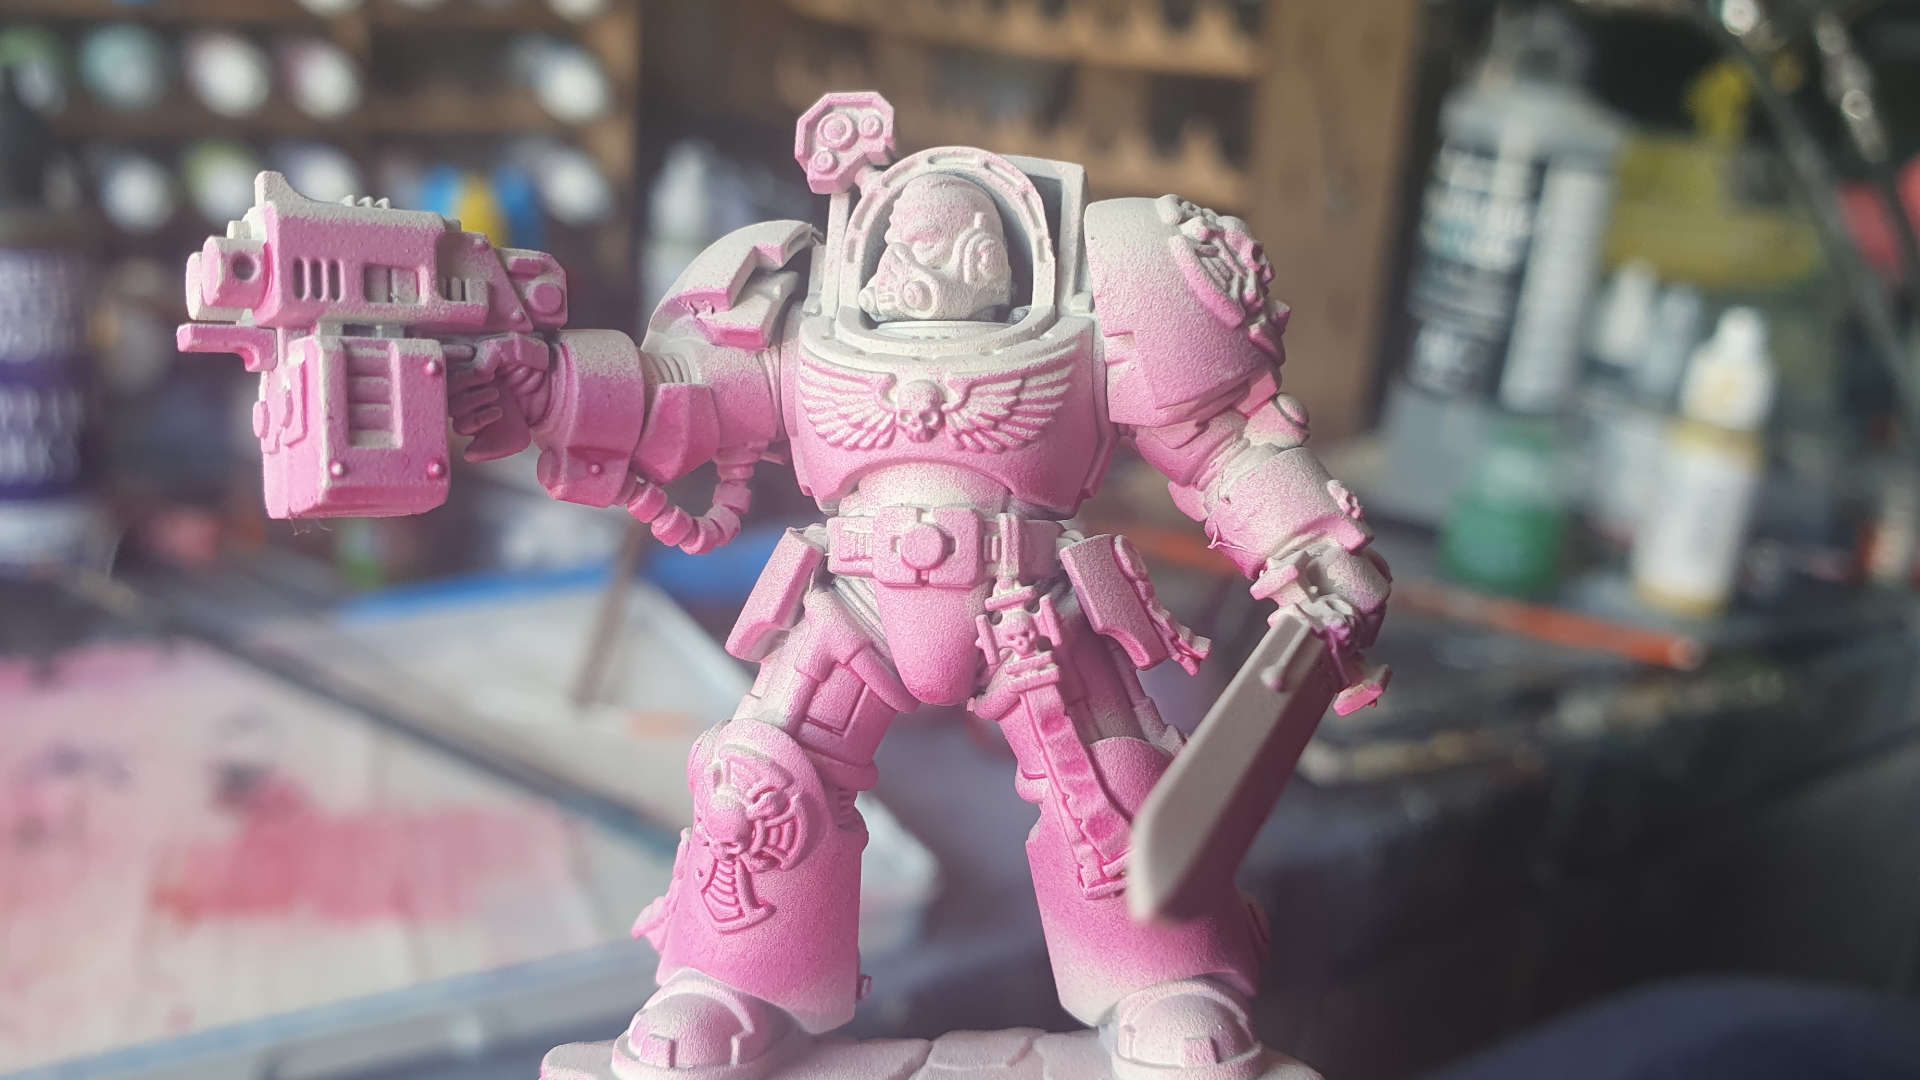 WARHAMMER 40K LEVIATHAN - SPACE MARINES ONLY - MINIATURE PAINTERS